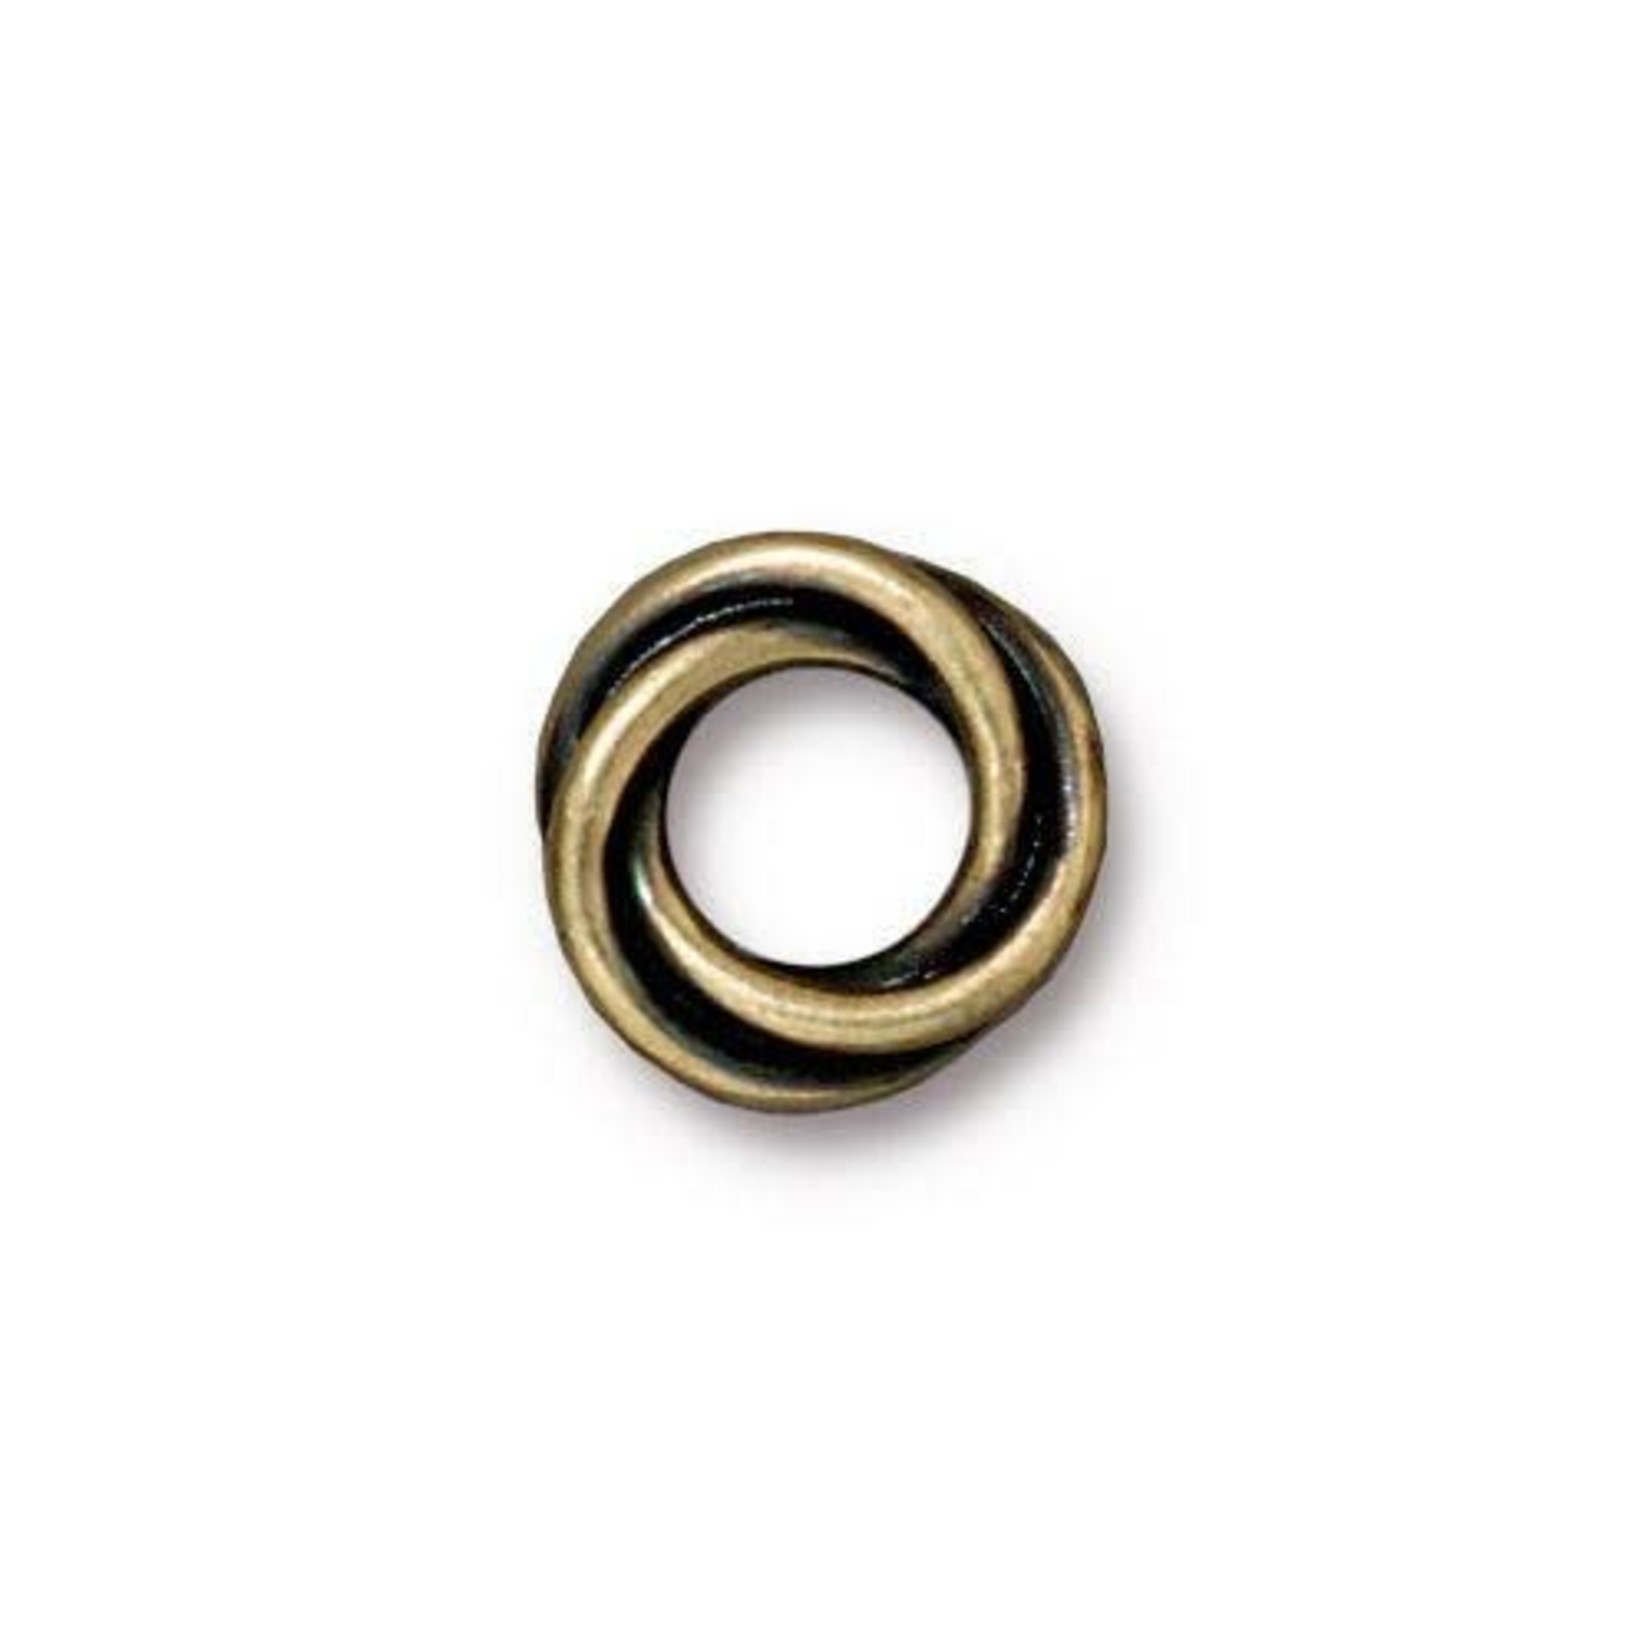 TierraCast Twisted 12mm Spacer -  Oxidized Brass Plated